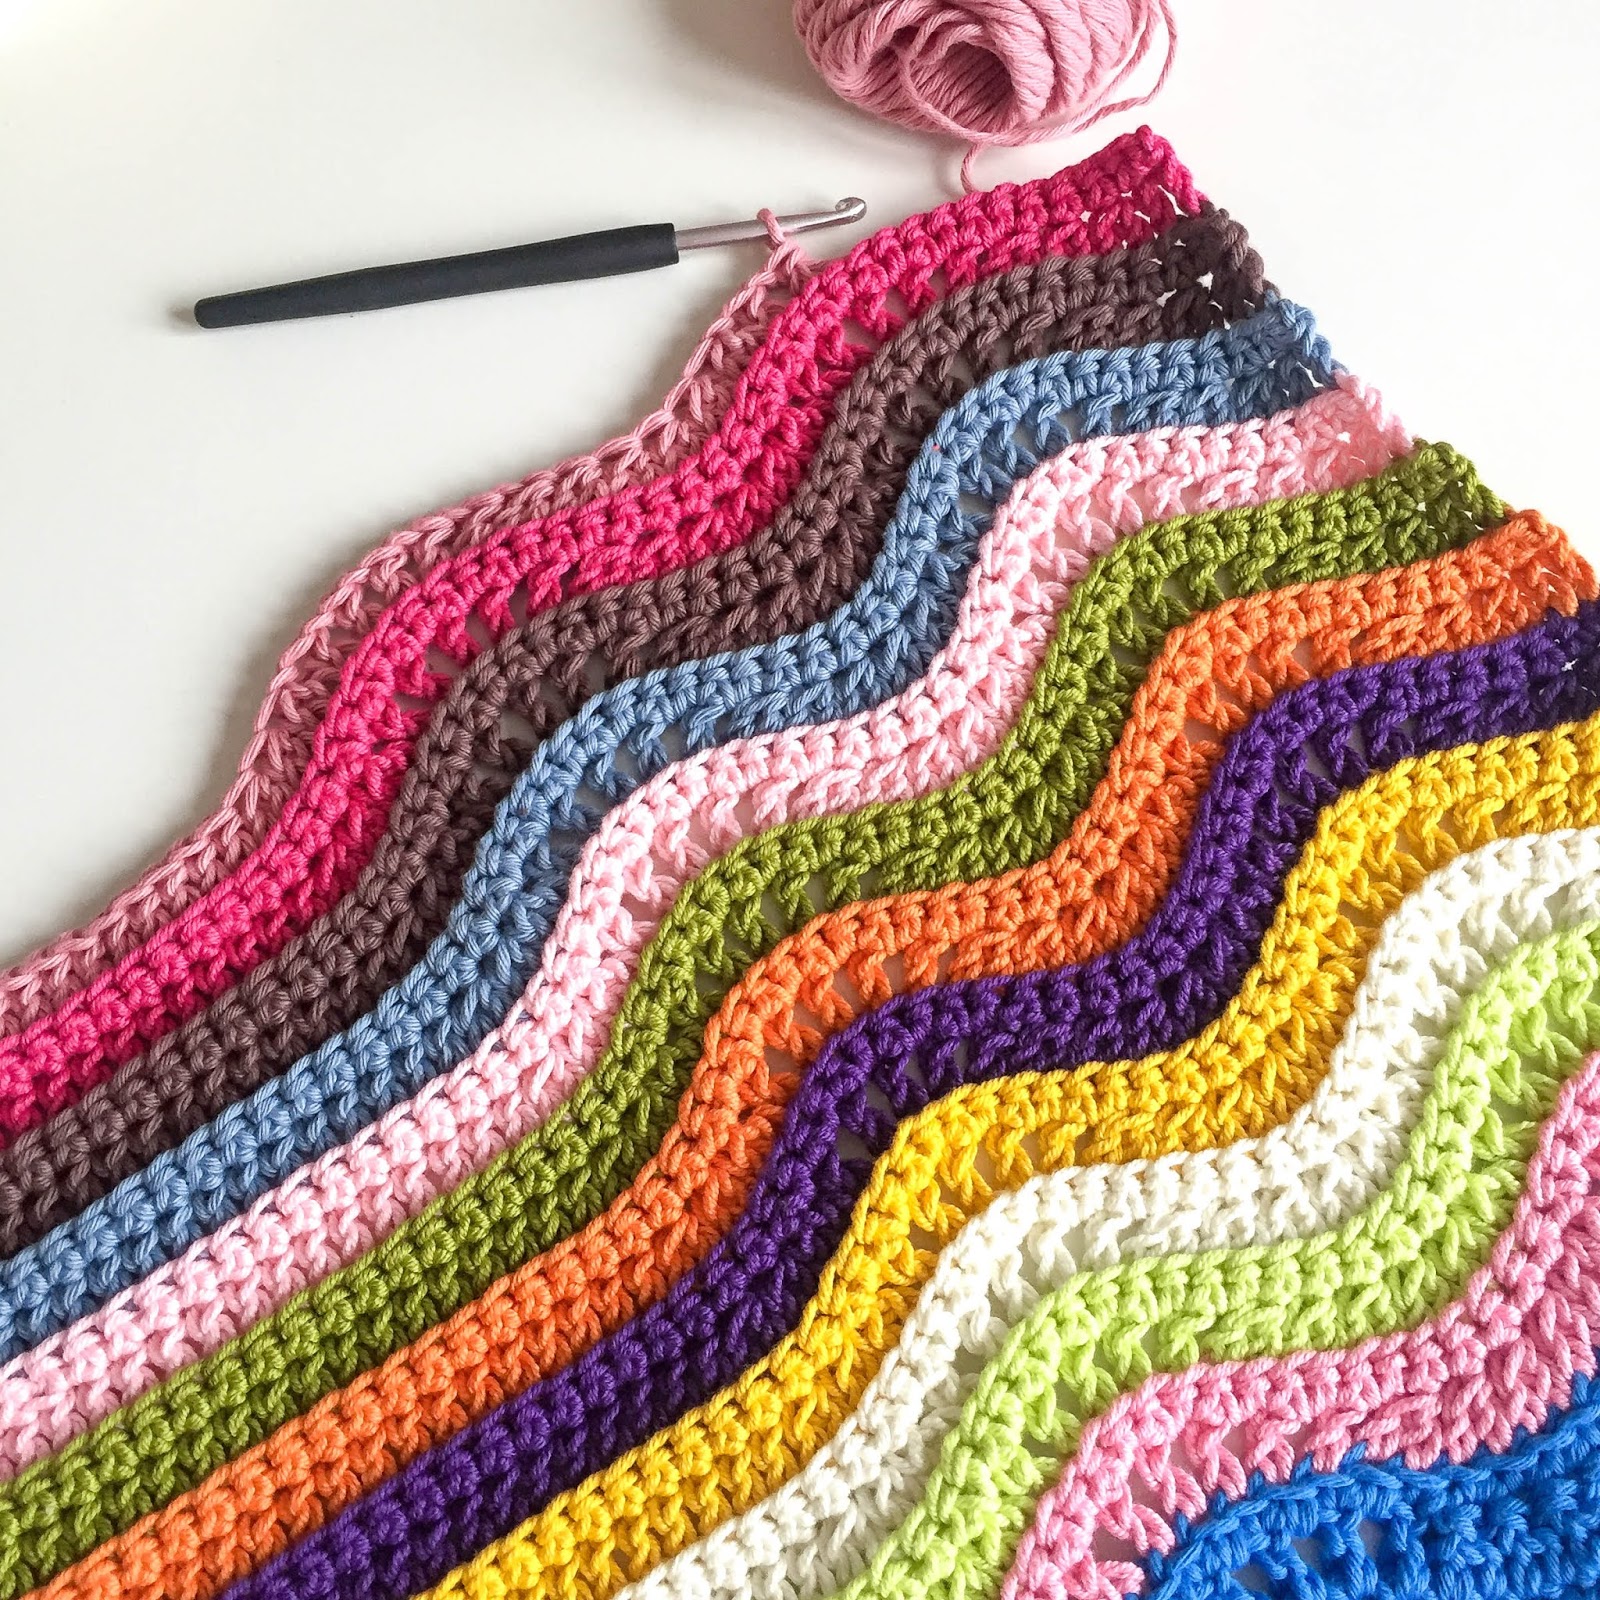 Crochet blanket in layers of waves - step by step free